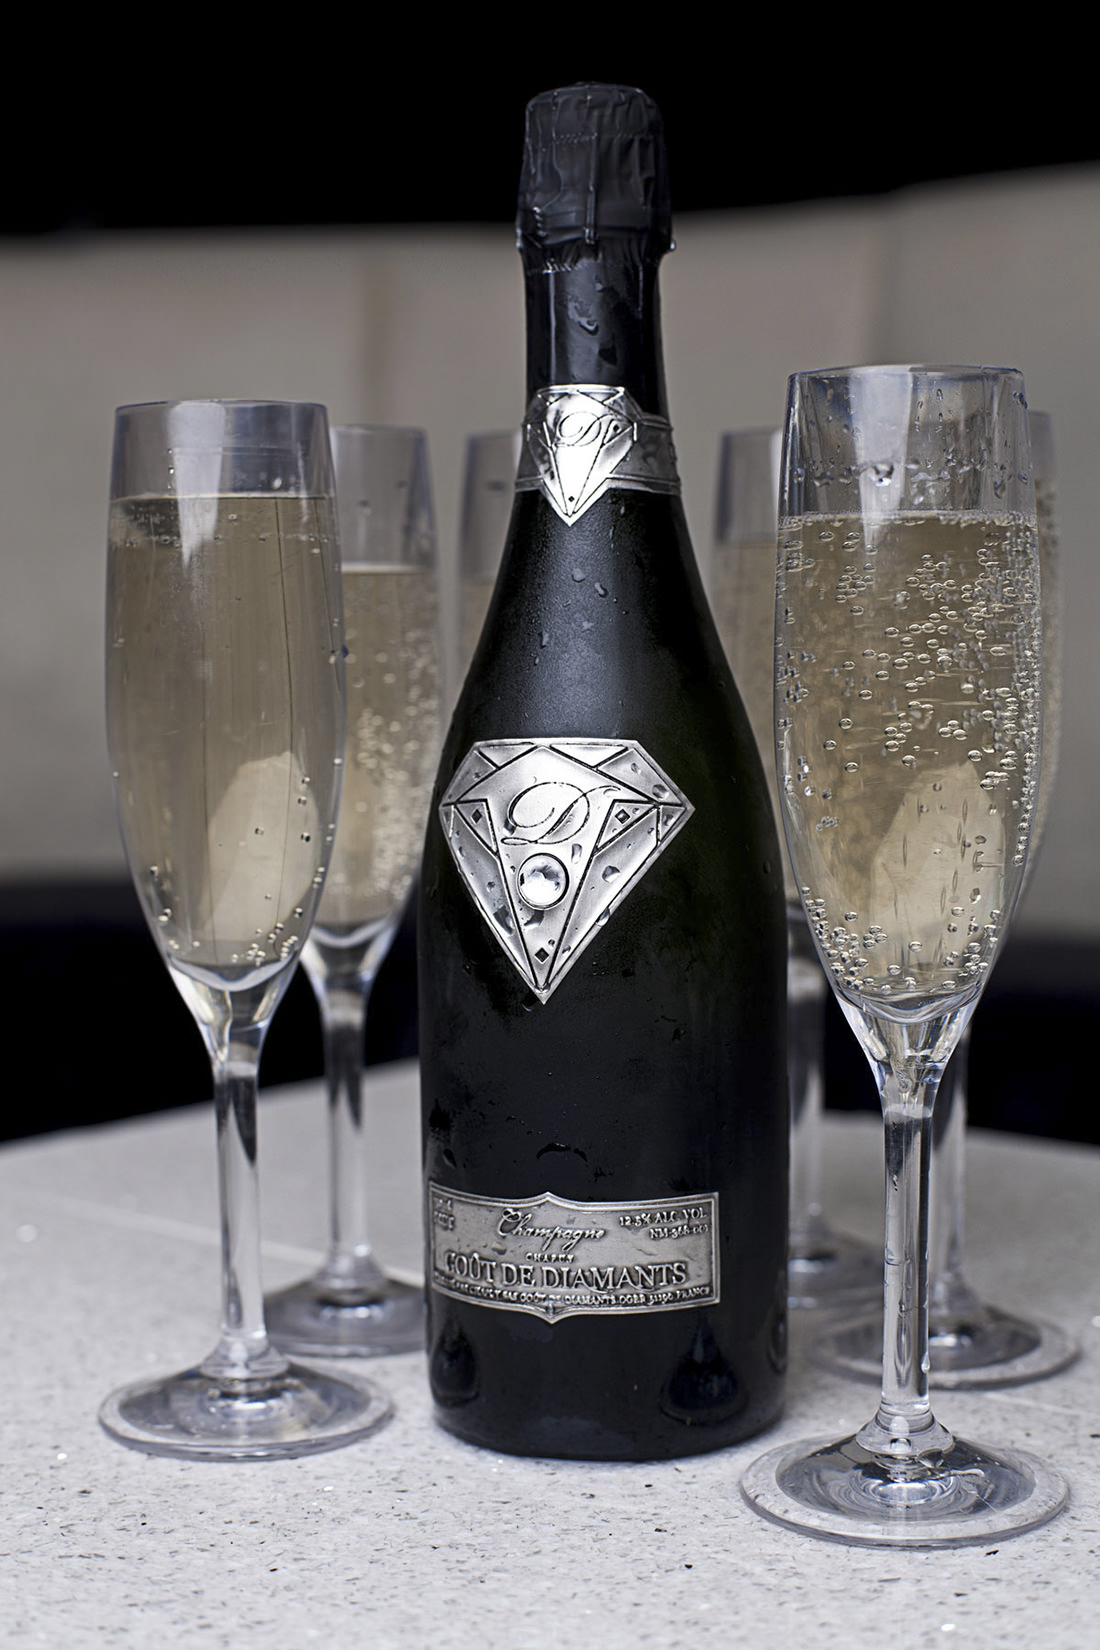 The Champagne bottle with diamonds taste